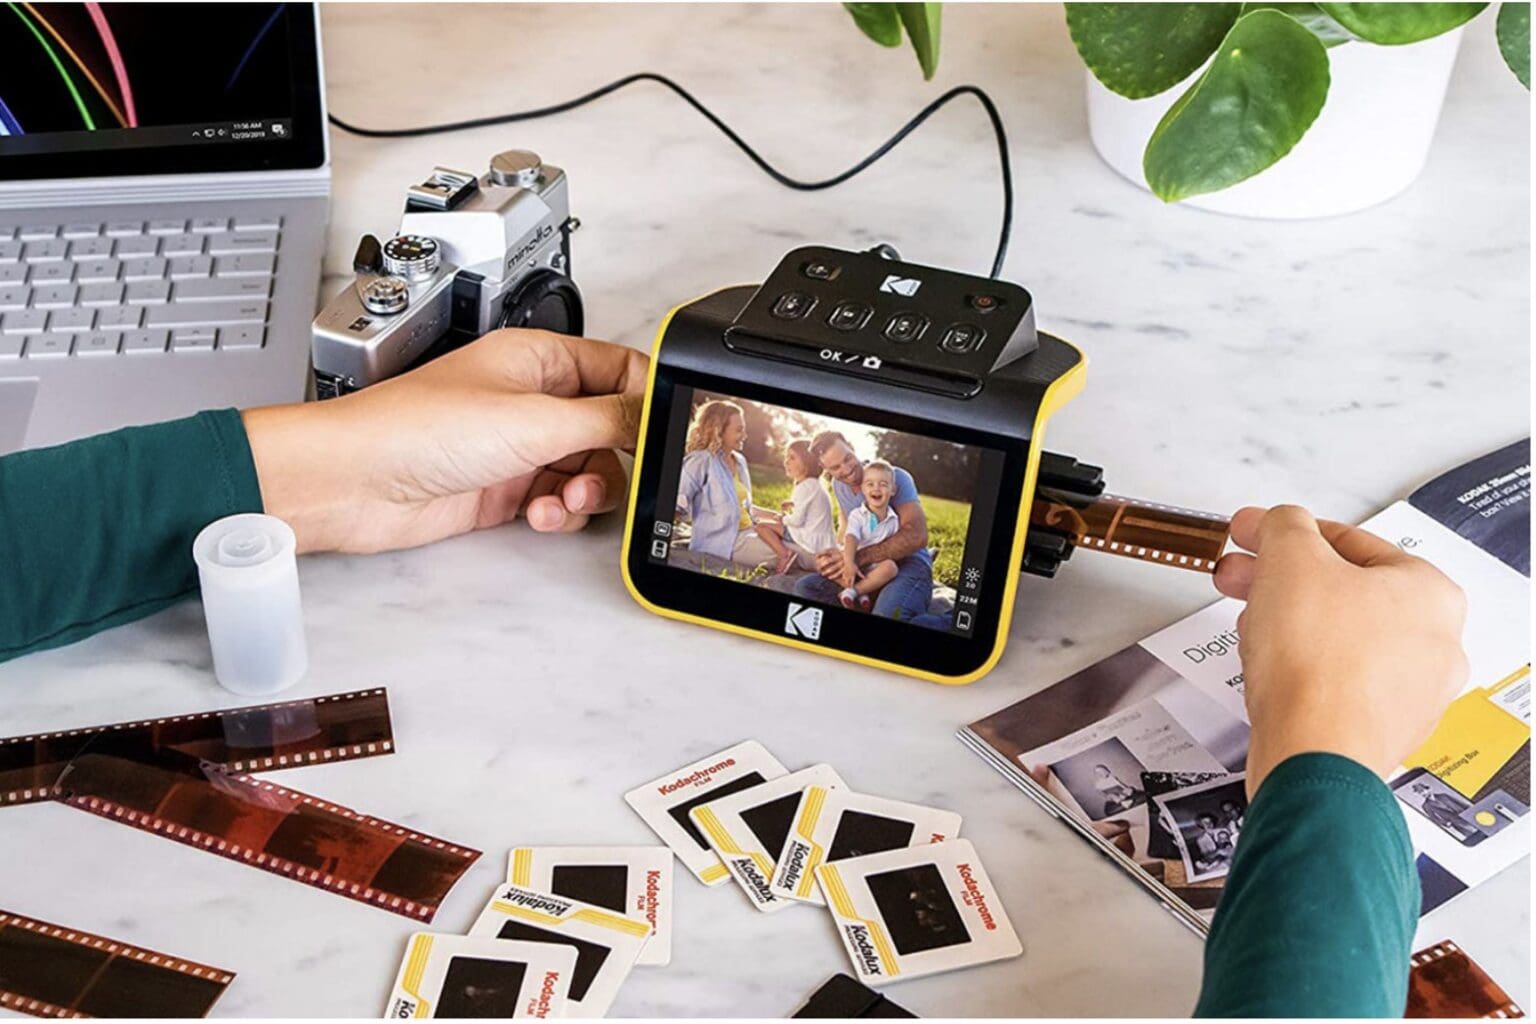 Get a Kodak film scanner for only $169.97 through October 15th!